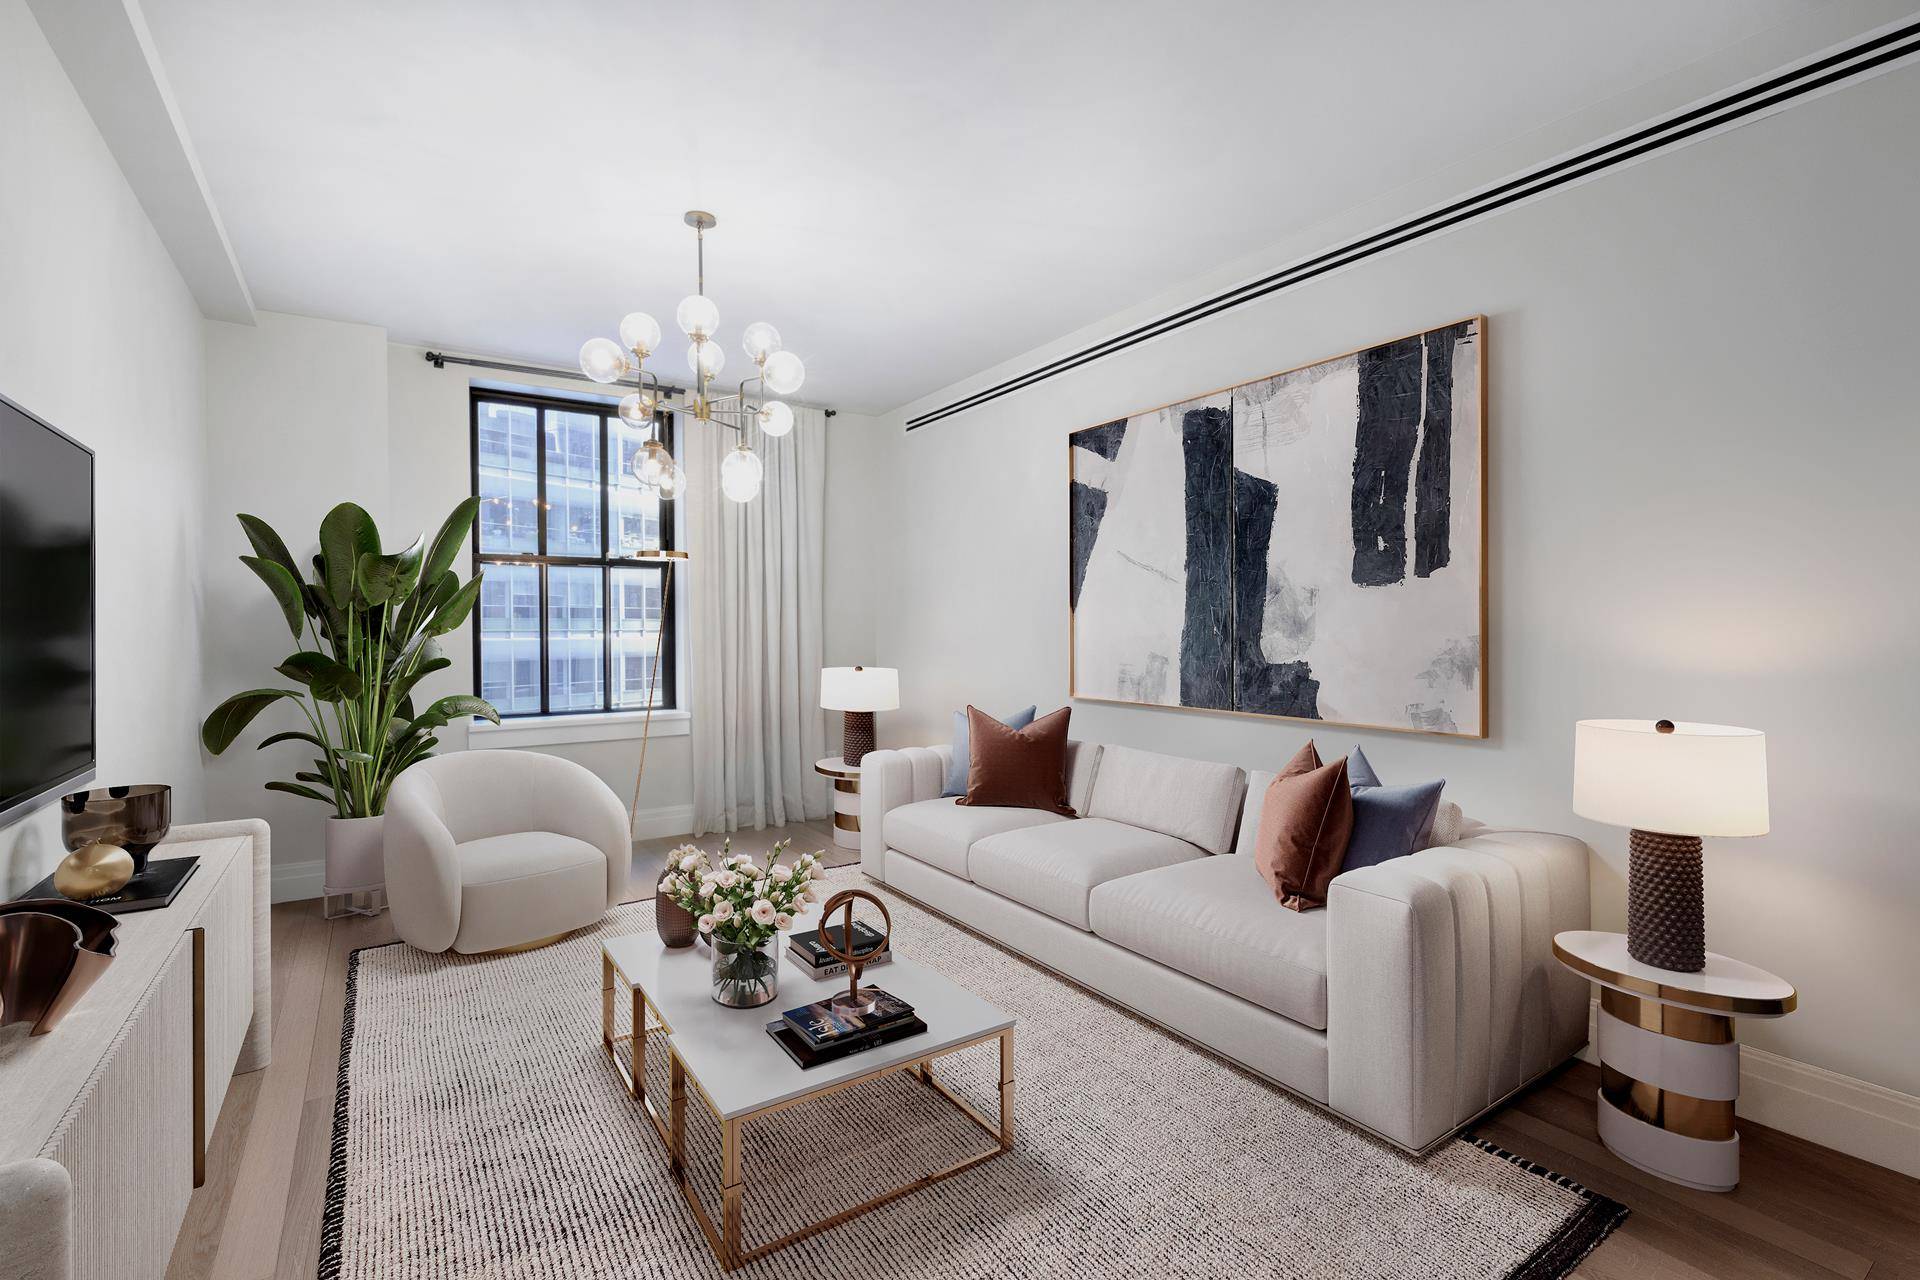 Welcome to apartment 15H at 100 Barclay Street, an extraordinary home nestled in a historic and beautiful Ralph Walker designed Tribeca tower and offered at one of the most cost ...